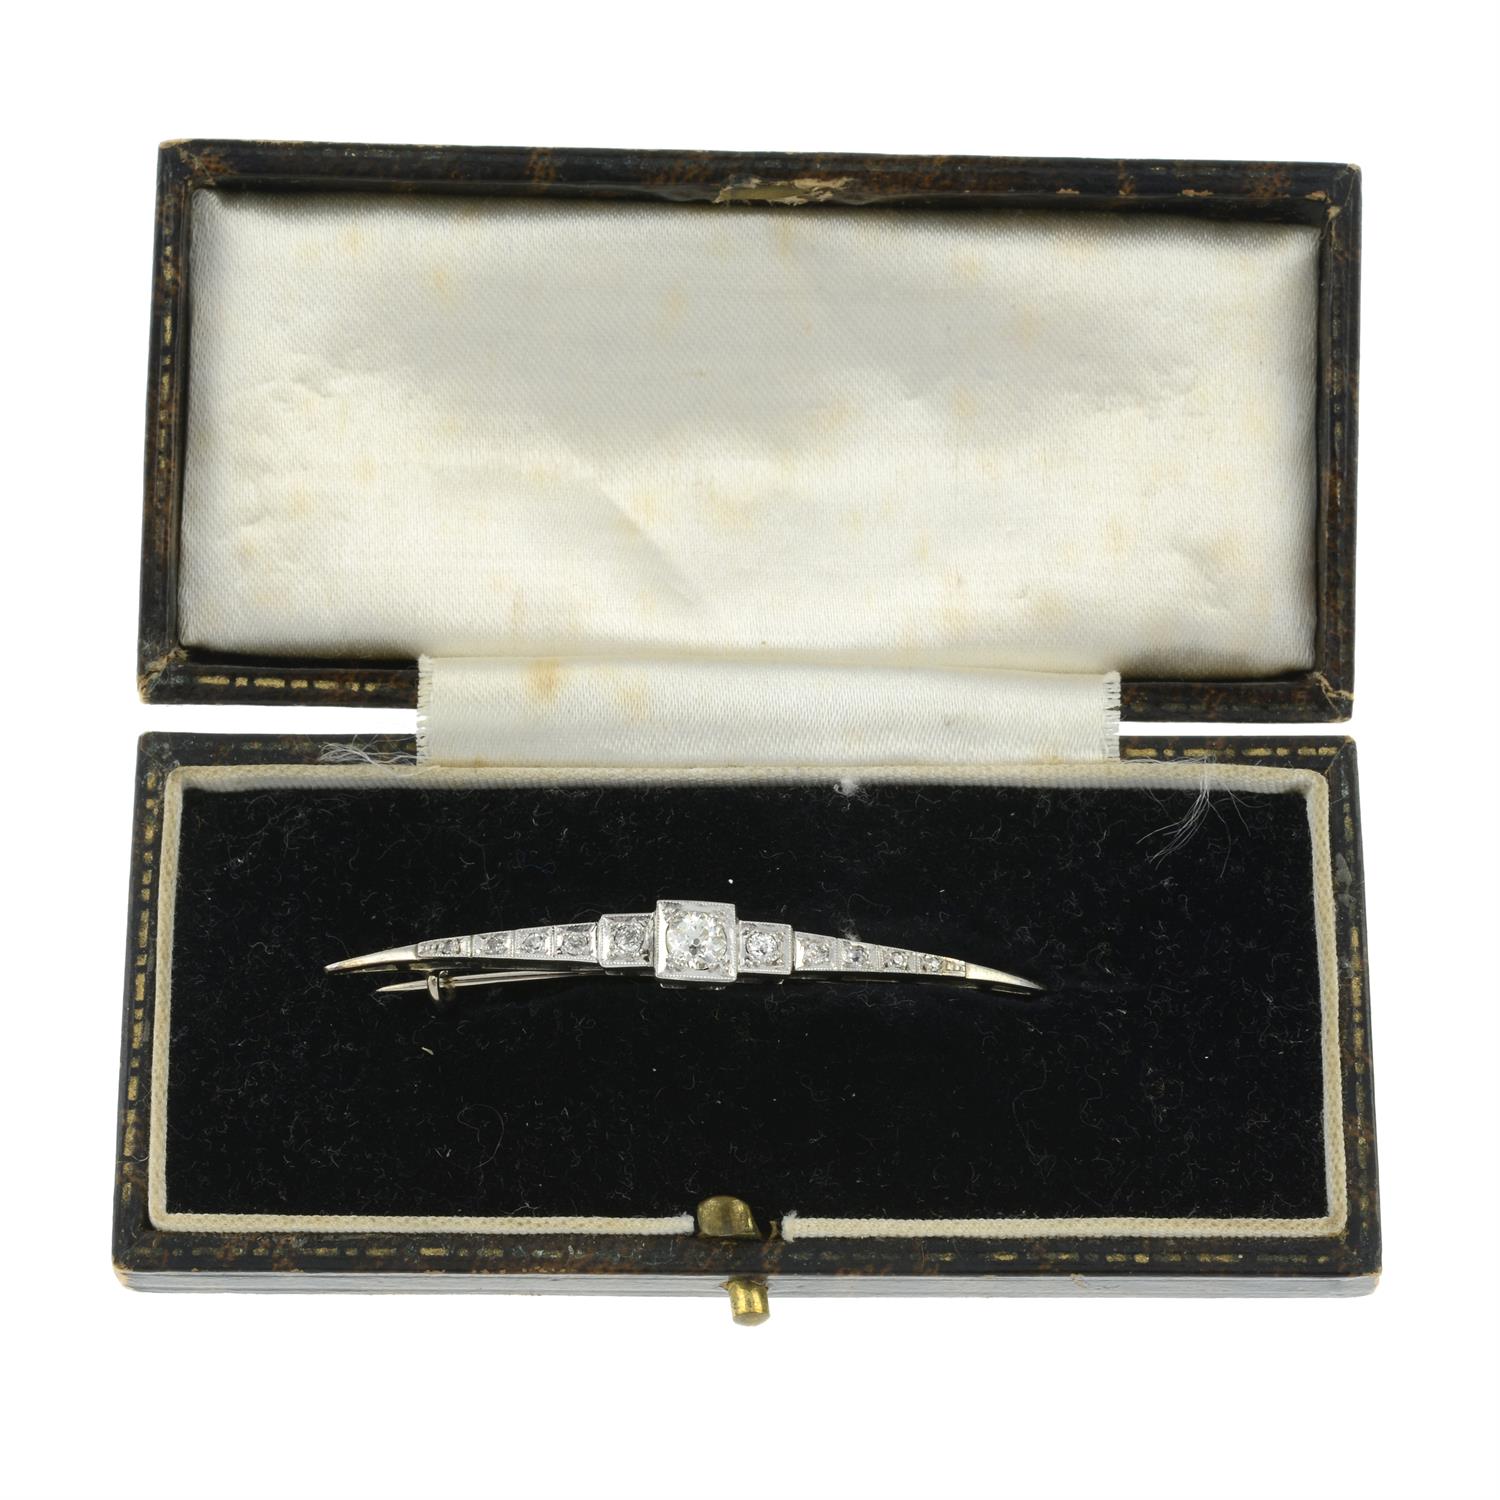 Early 20th century gold diamond brooch. - Image 3 of 3